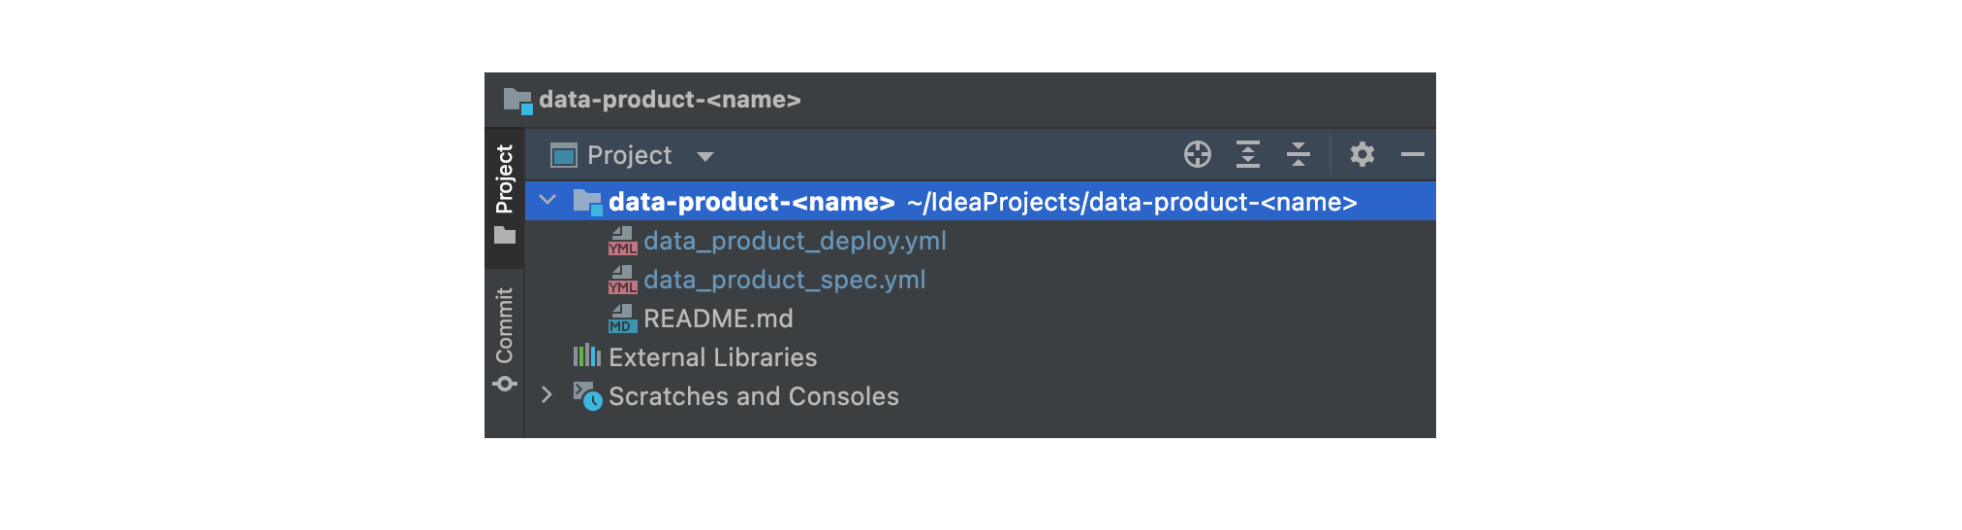 The data product repository has a starter/scaffold code with two important files data_product_spec.yml and data_product_deploy.yml.